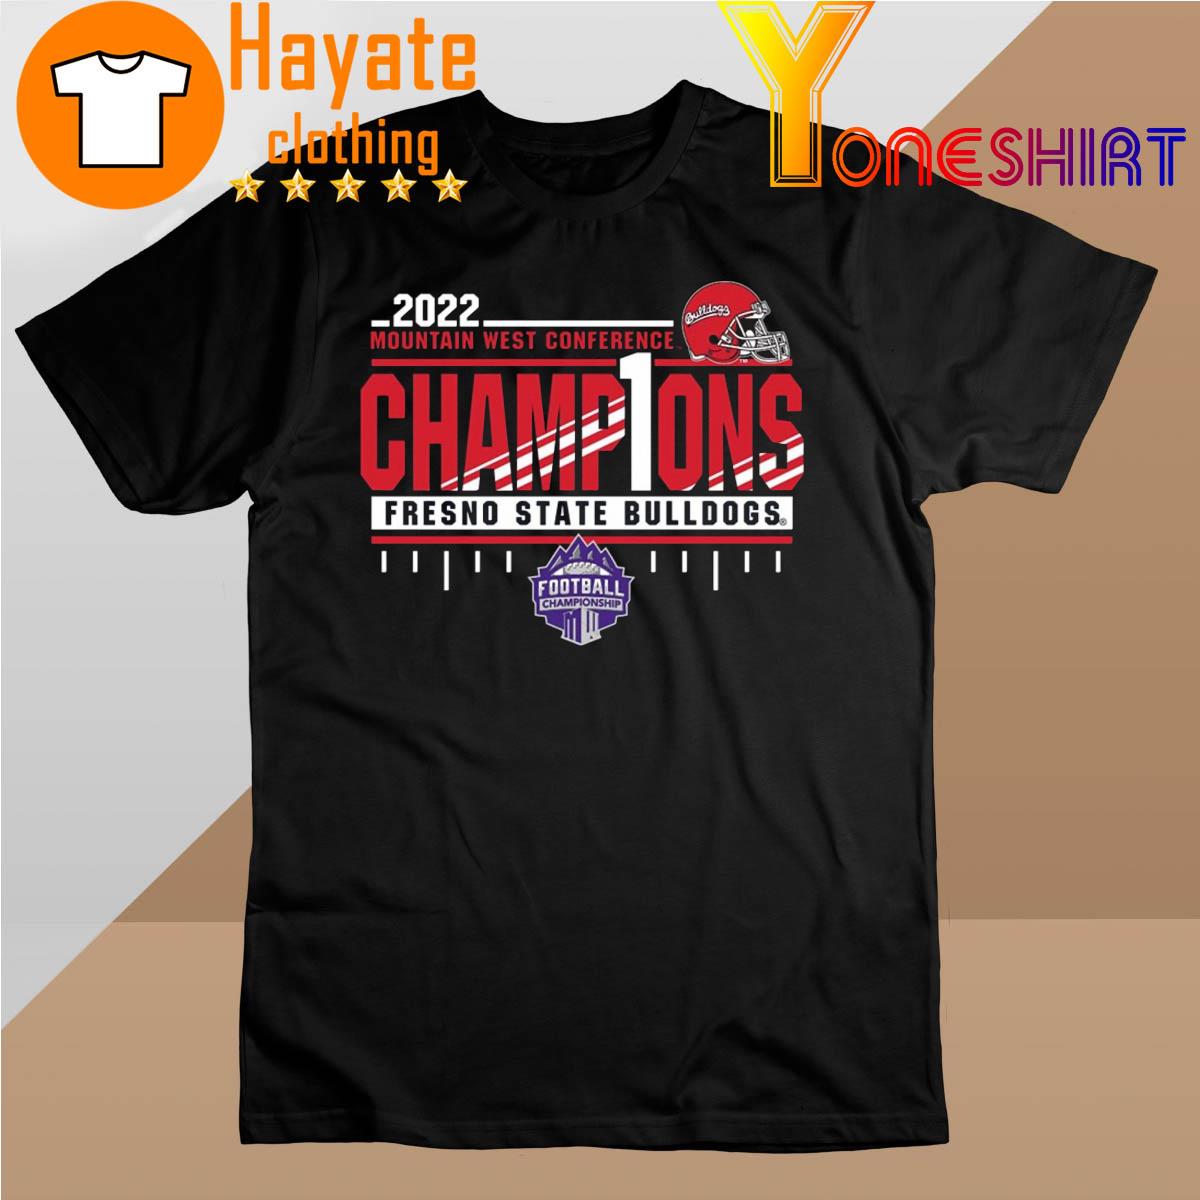 2022 Mountain west conference Champions Fresno State Bulldogs shirt